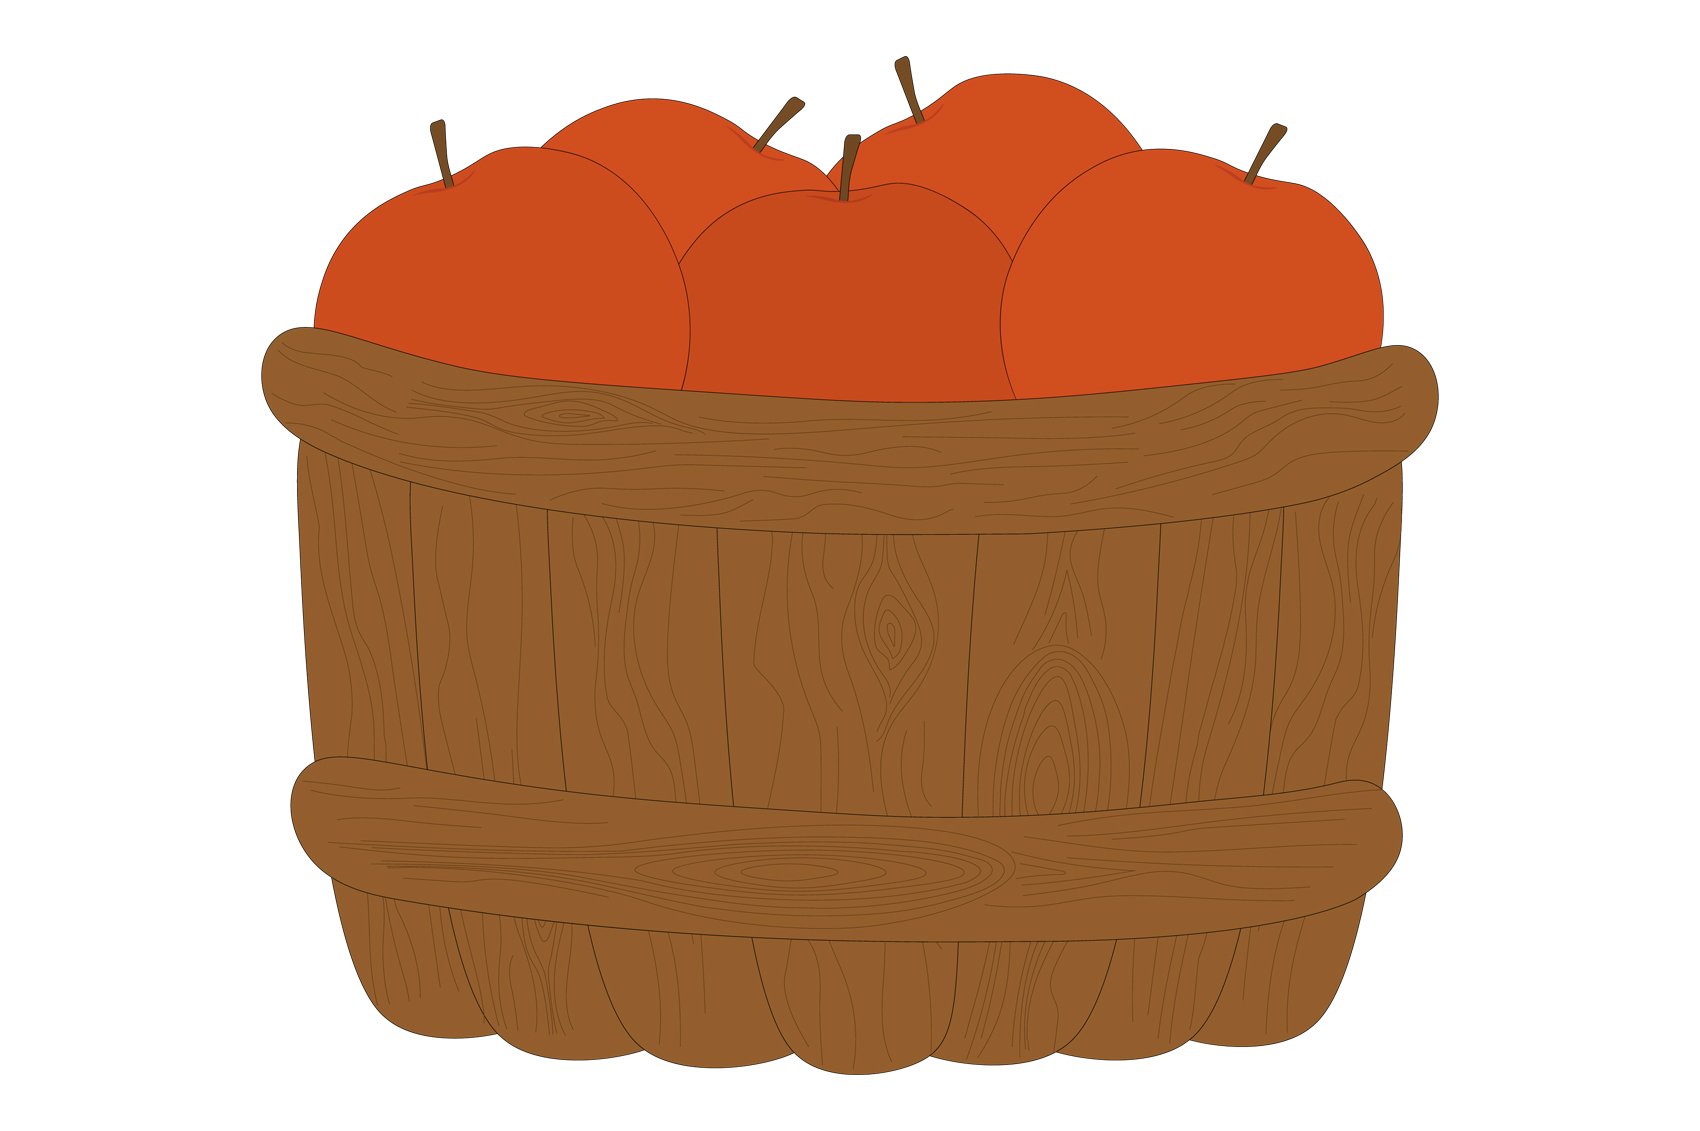 Hand drawn basket with apples.